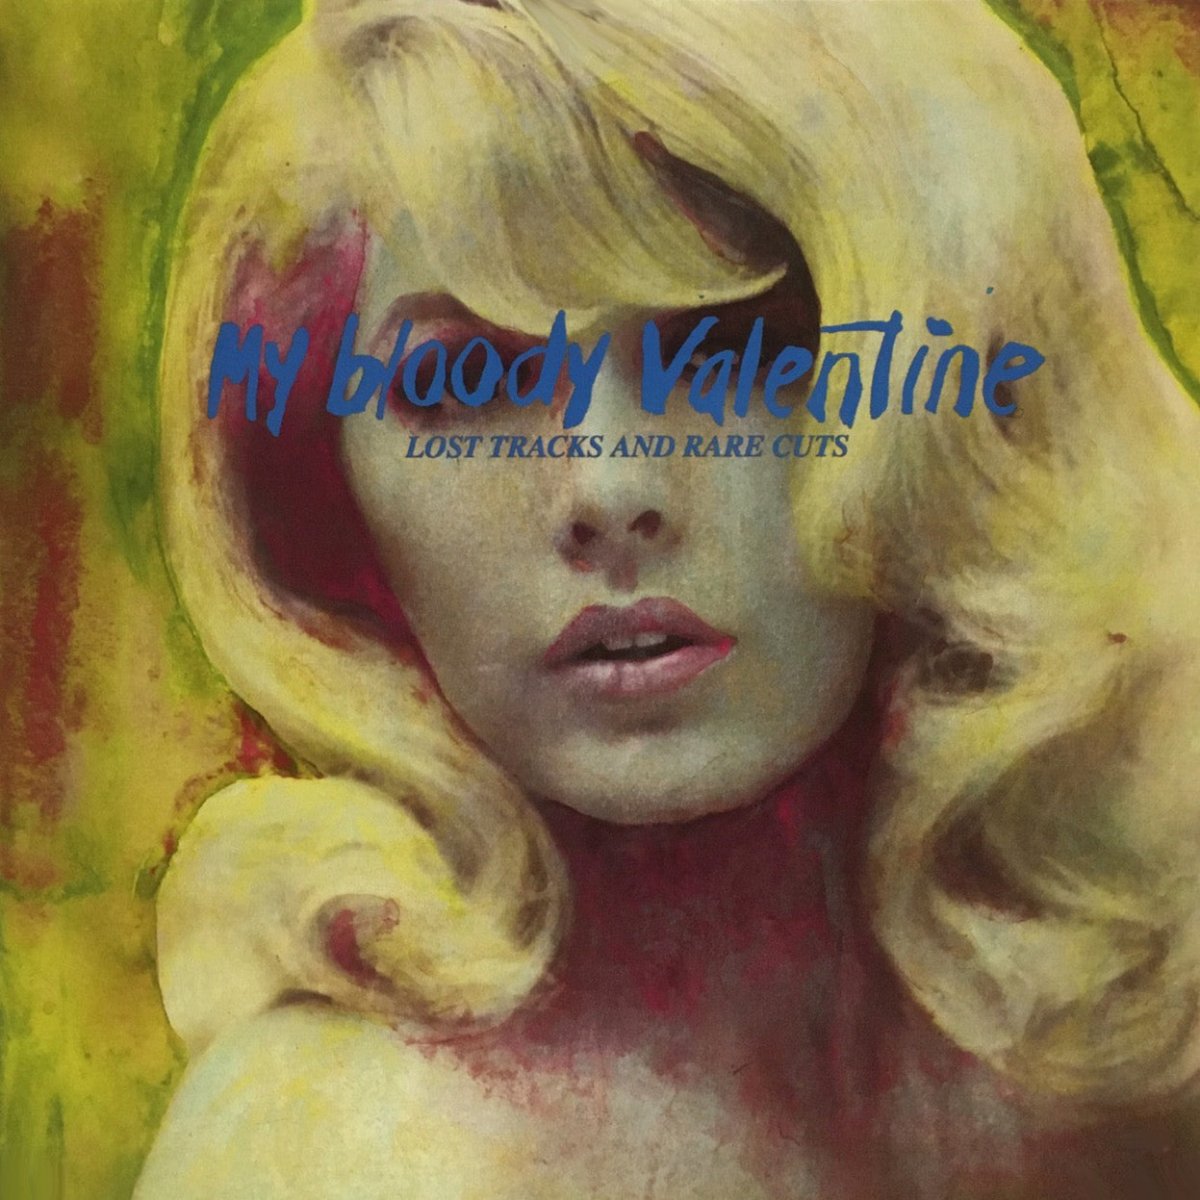 My Bloody Valentine - Lost Tracks And Rare Cuts Vinyl